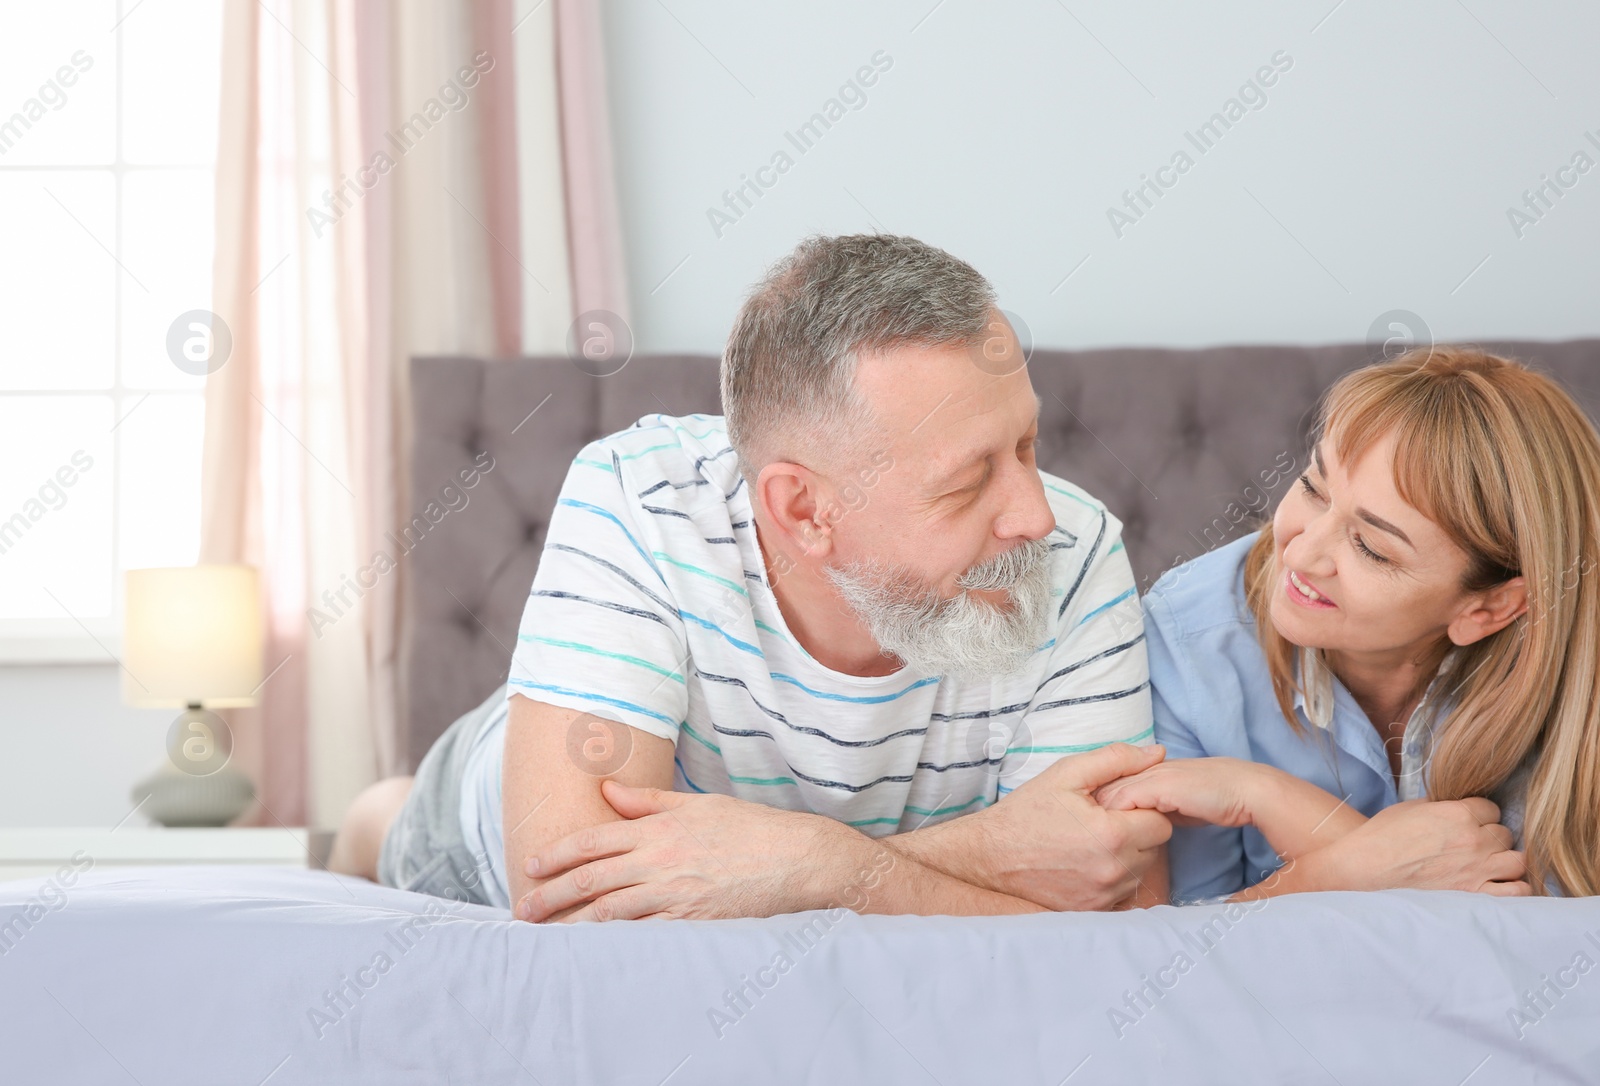 Photo of Mature couple together on bed at home